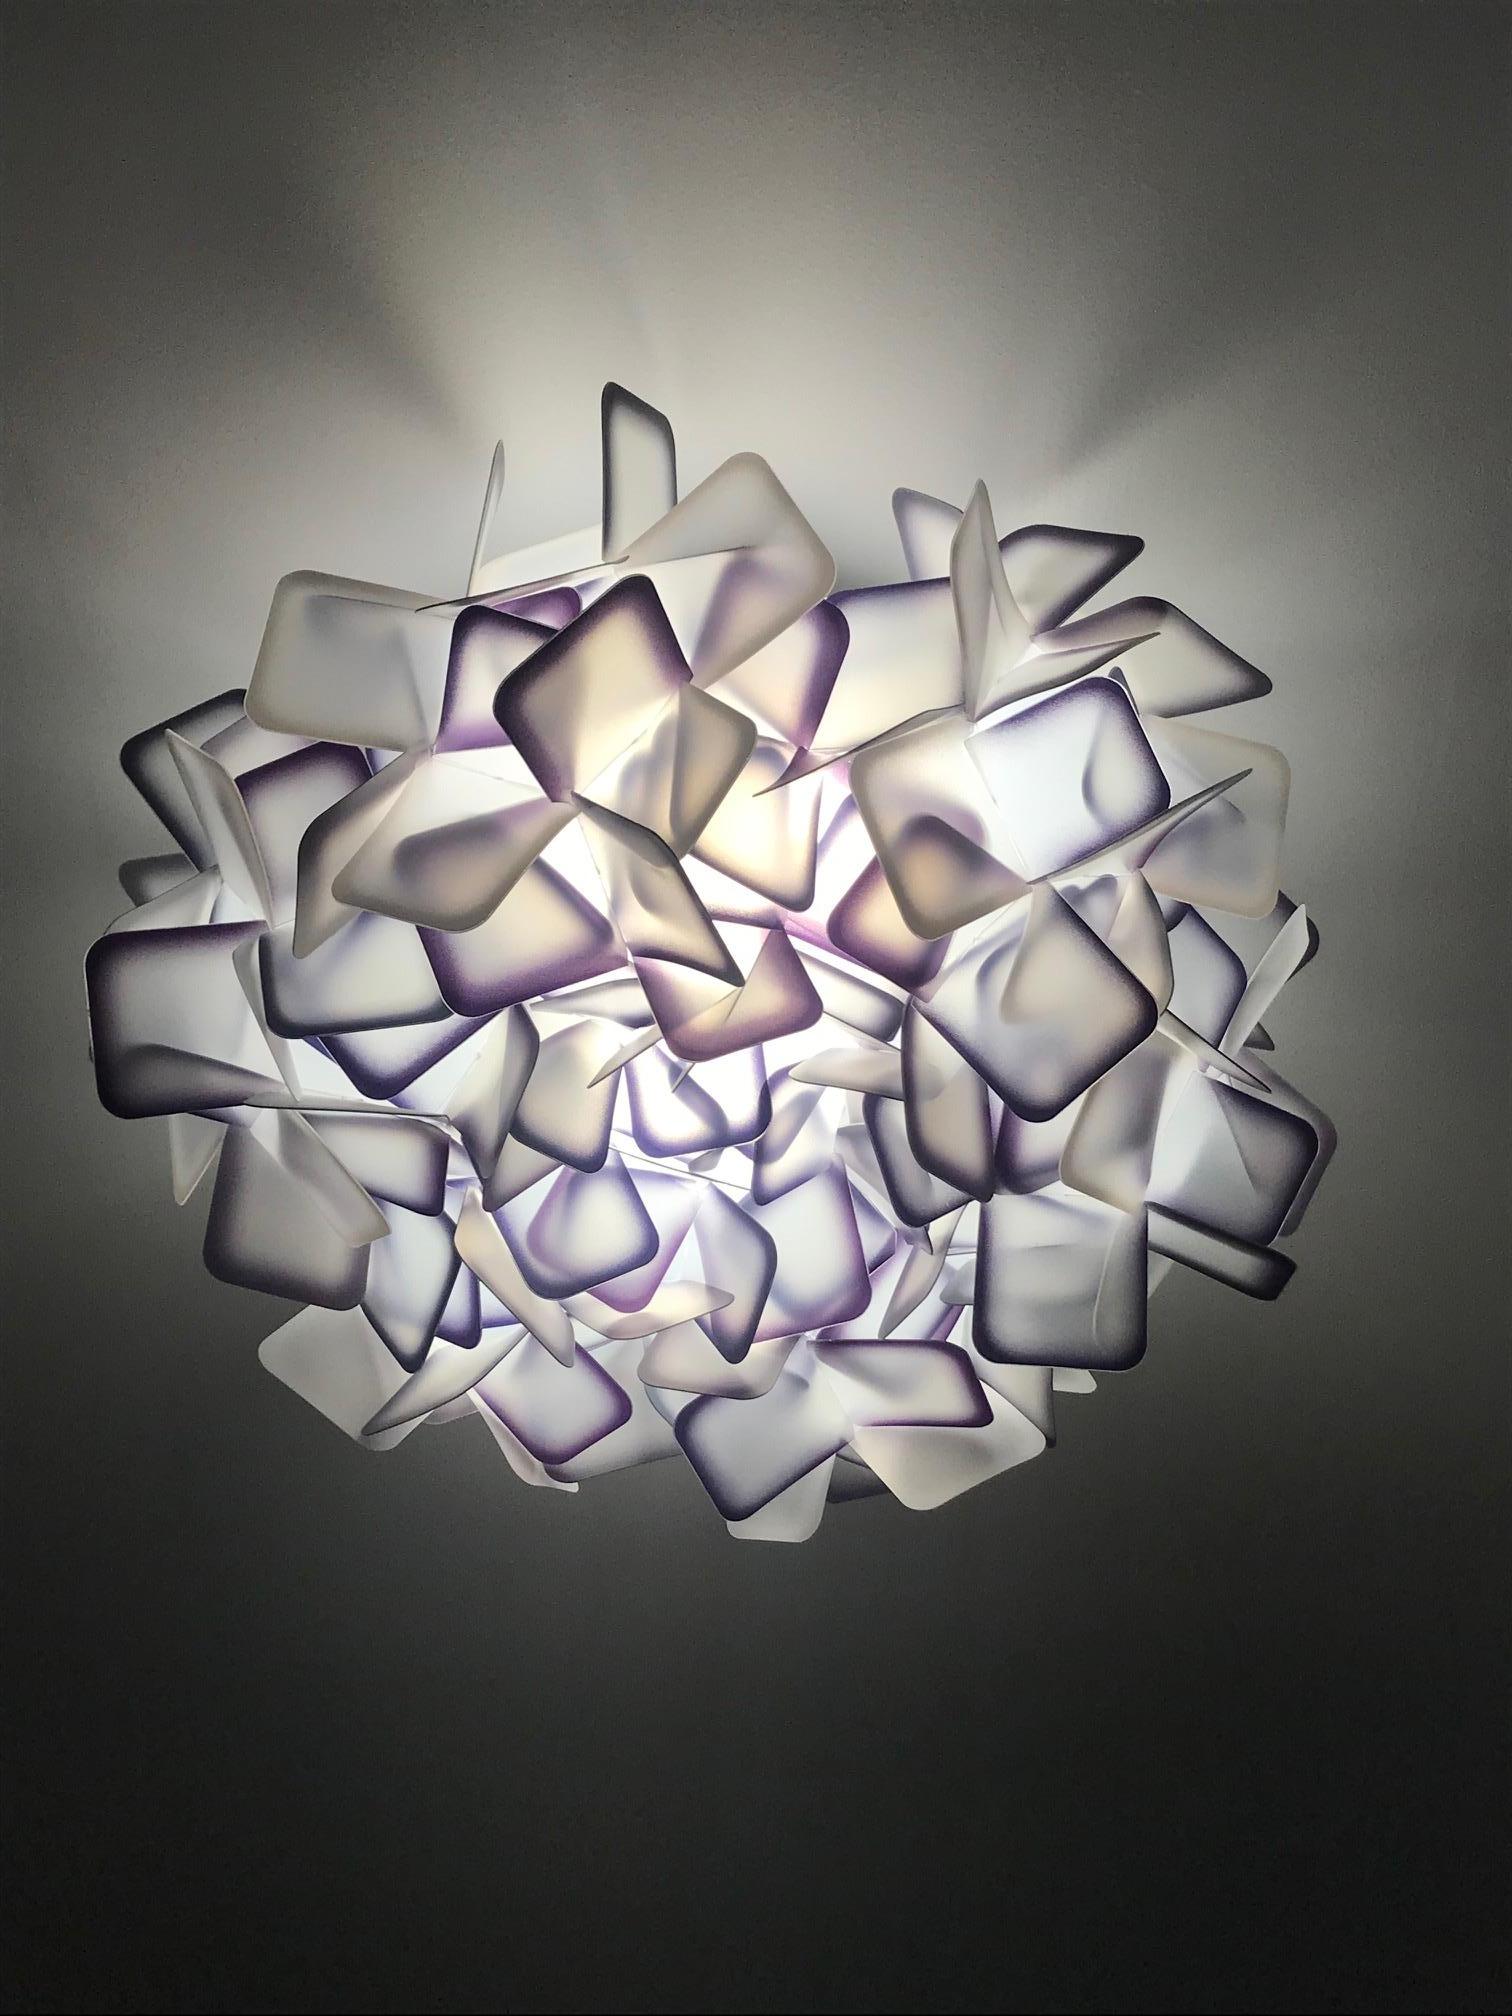 Exquisite ceiling light or wall sconce comprised of multifaceted interlocking resin squares. The square clusters are made of the patented Opalflex developed through the recycling of technopolymers and glass crystals. The resin squares are frosted